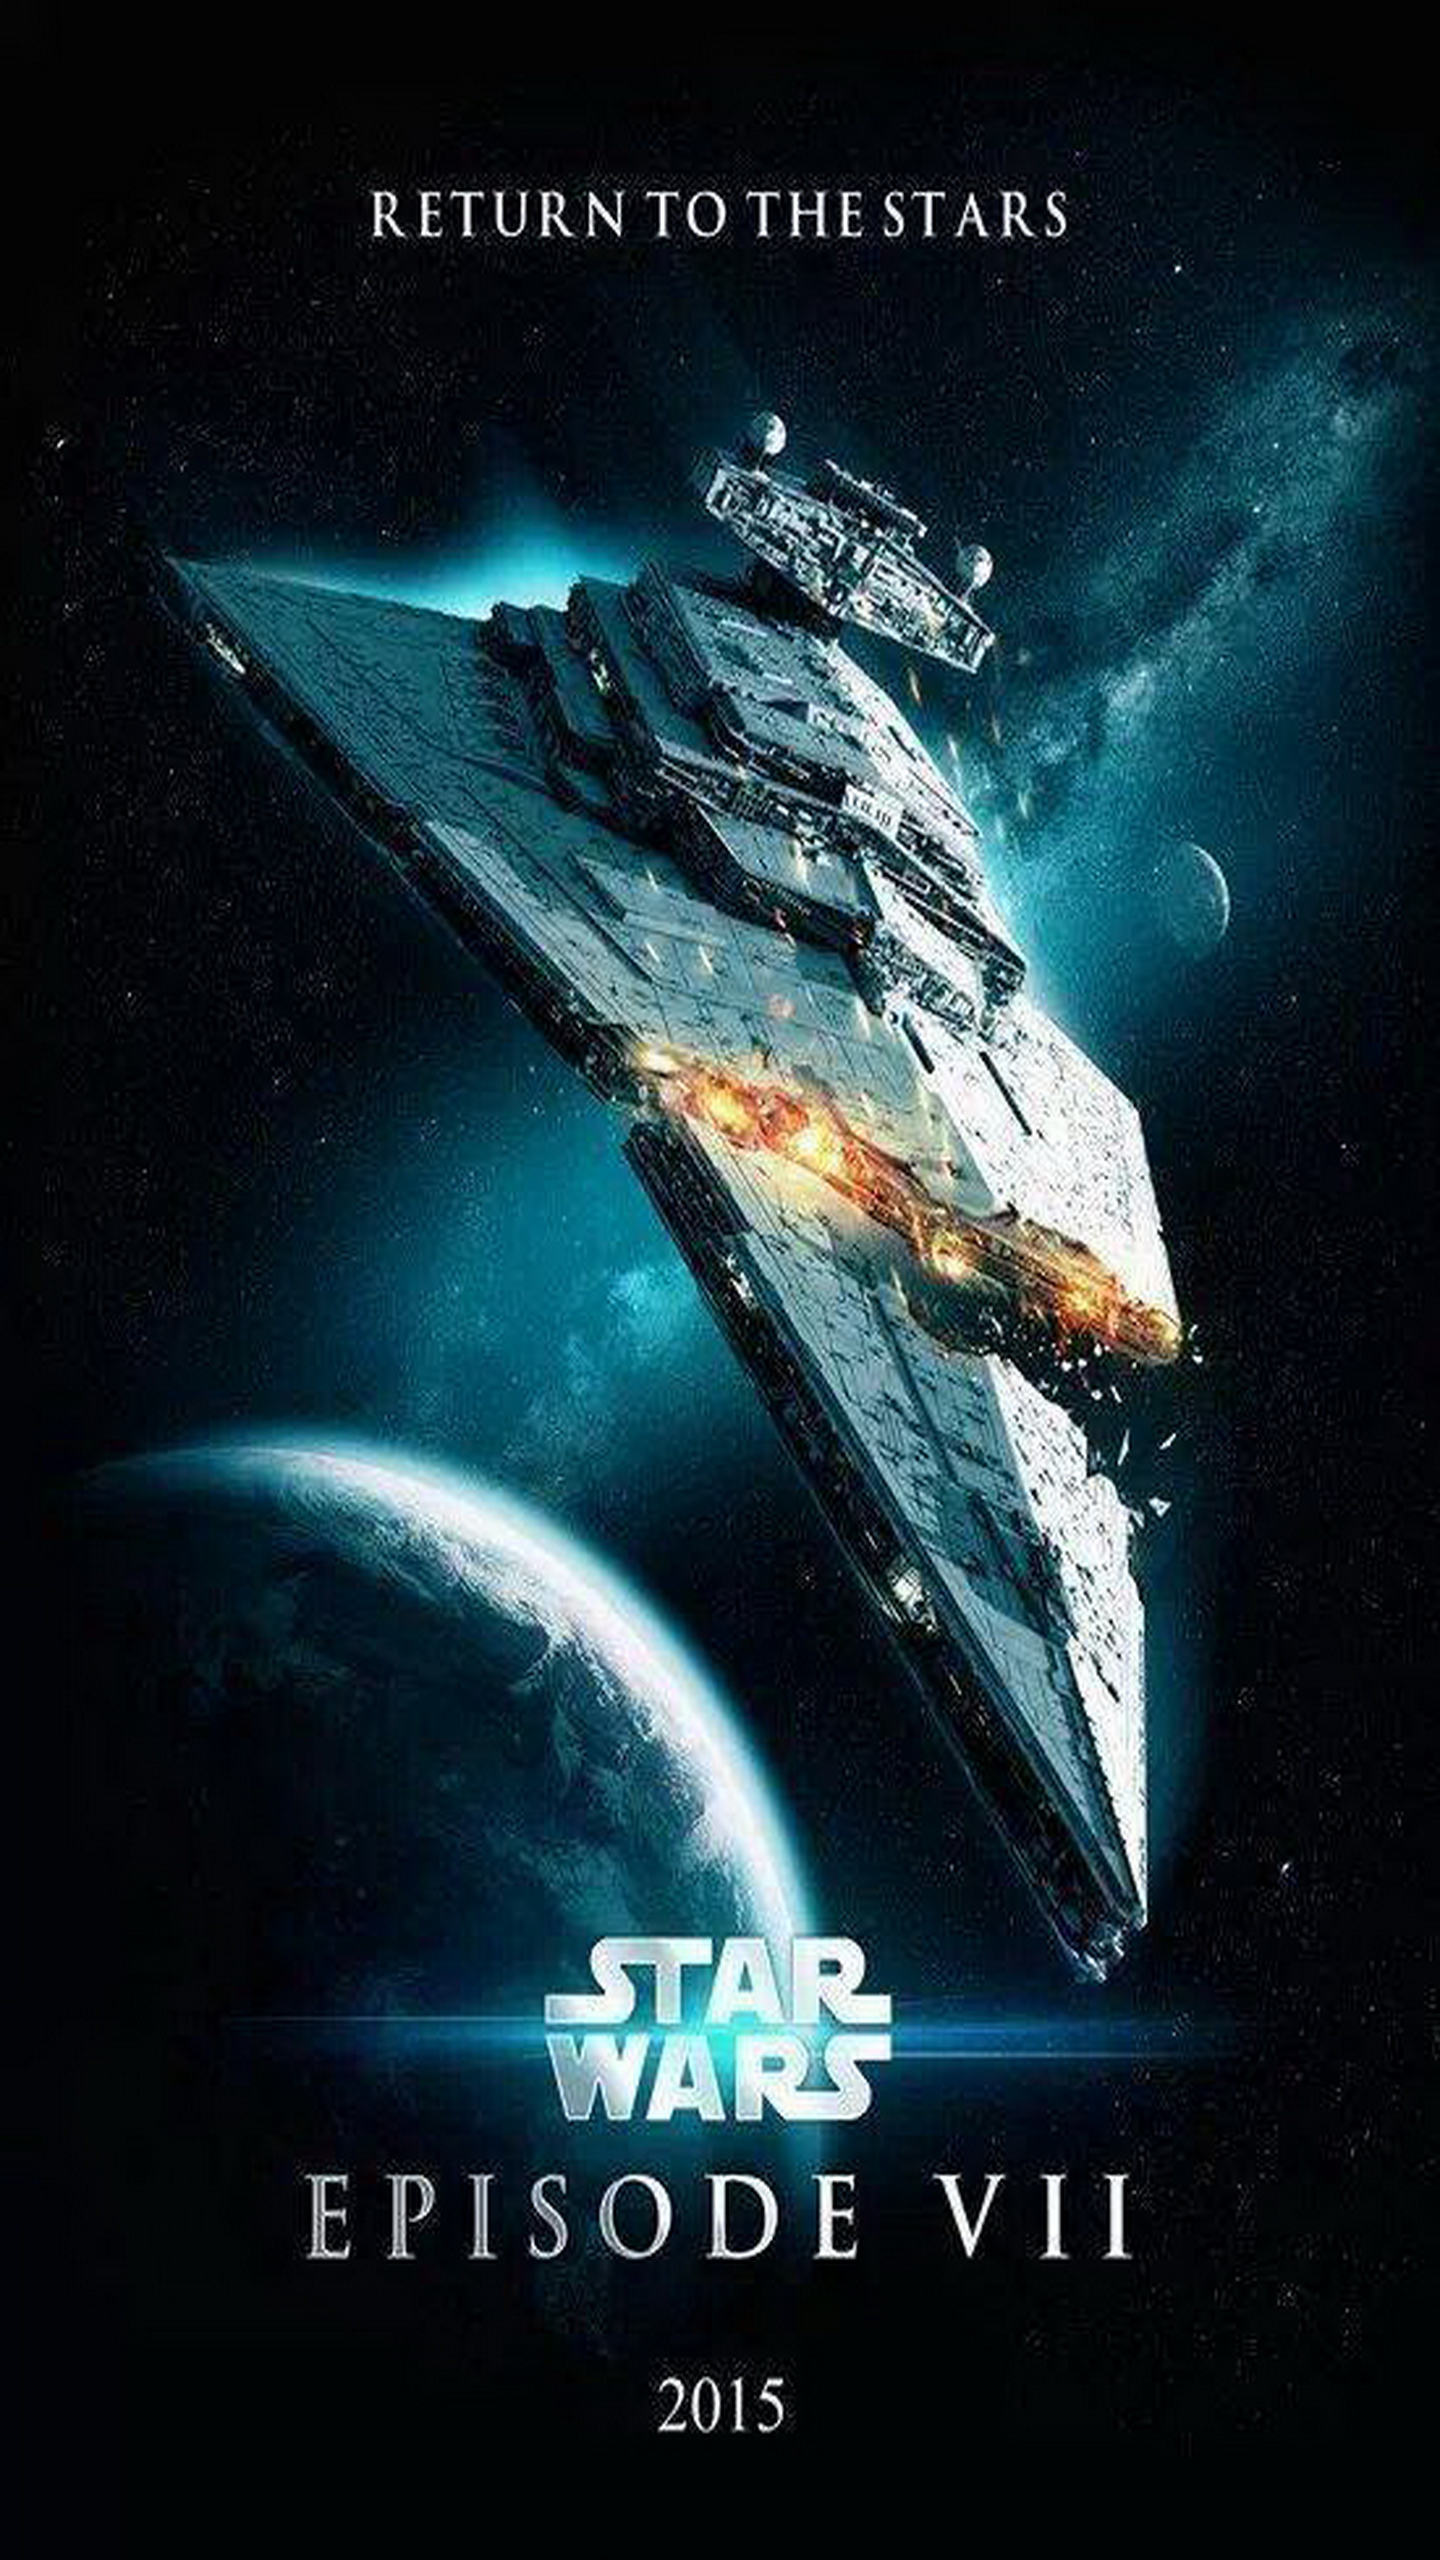  VII The Force Awakens 2015 Poster Galaxy Note Wallpaper 3 1440x2560